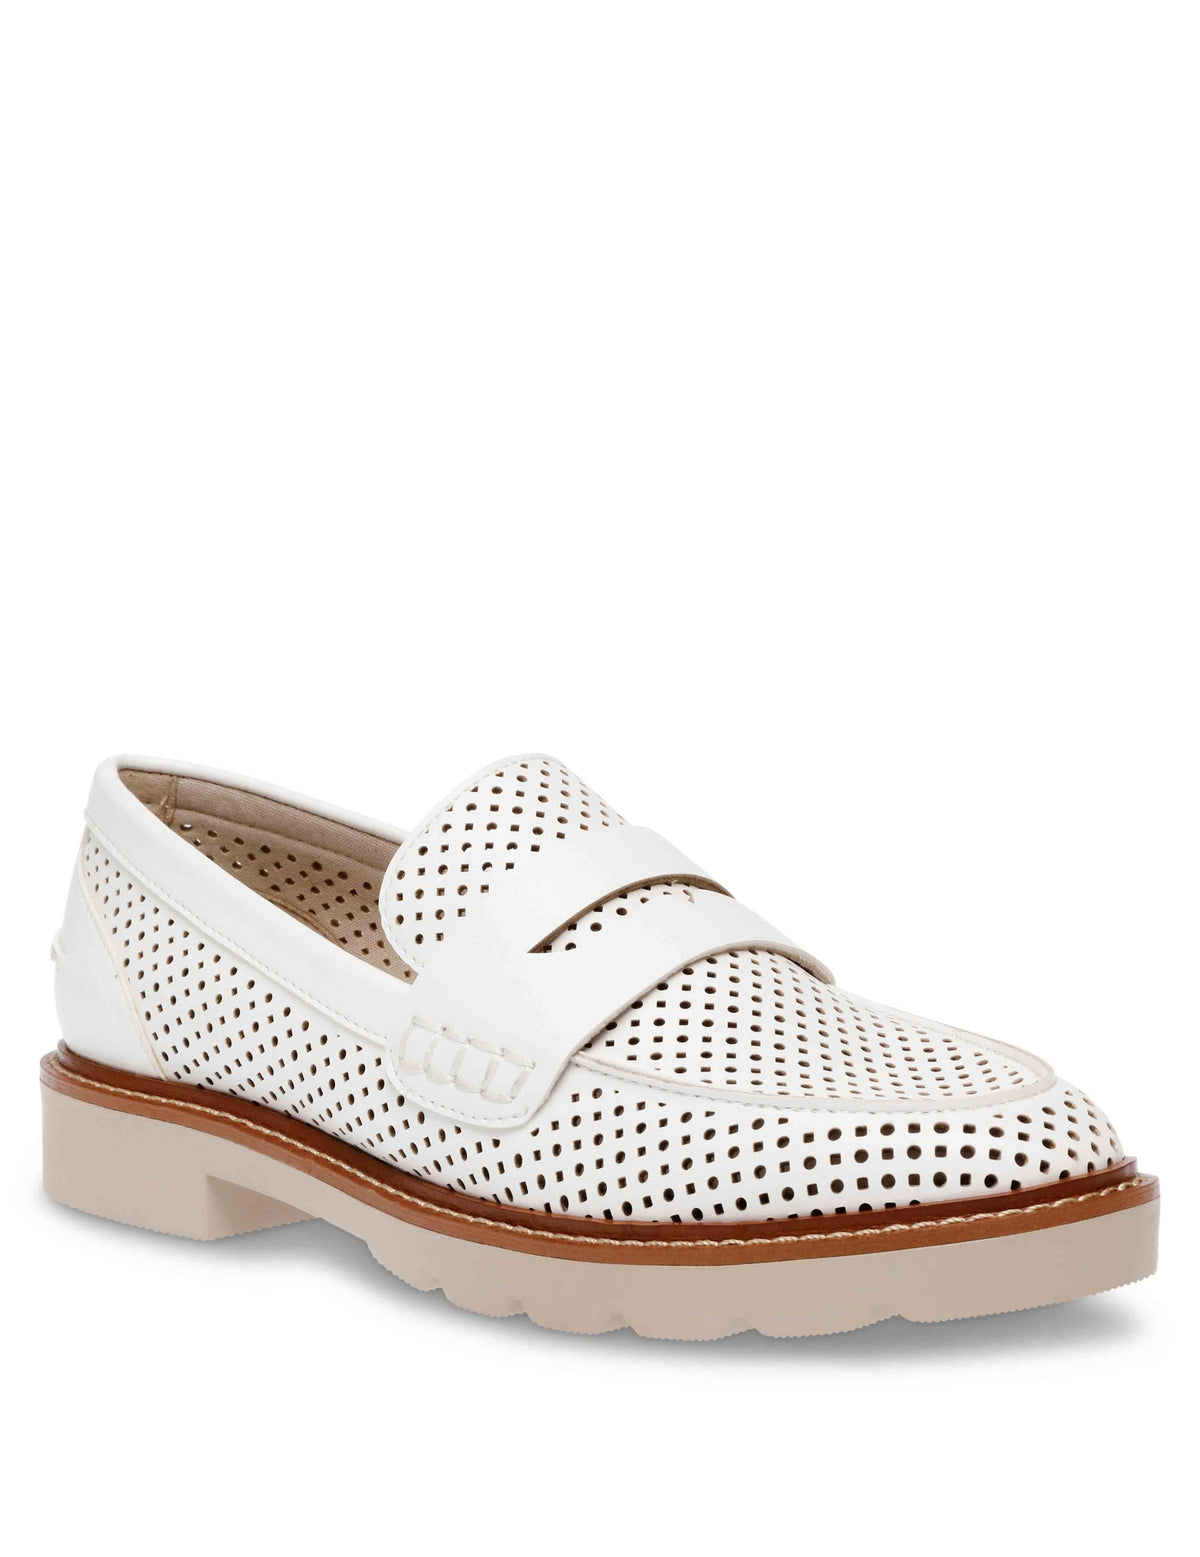 Anne Klein White Perforated Emmylou Perforated Loafer